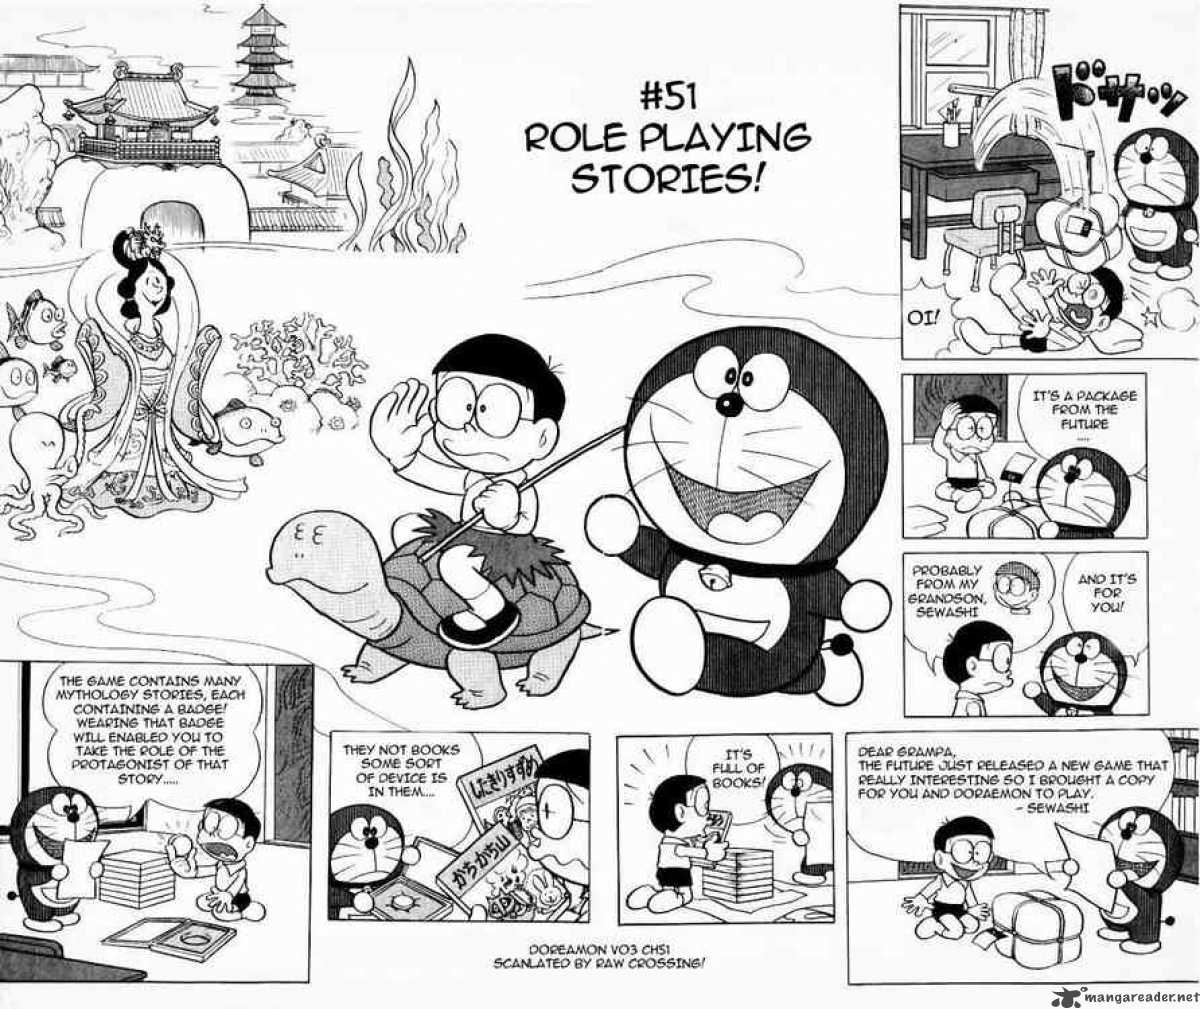 Chapter 051Role Playing Stories Doraemon Wiki FANDOM powered by Wi